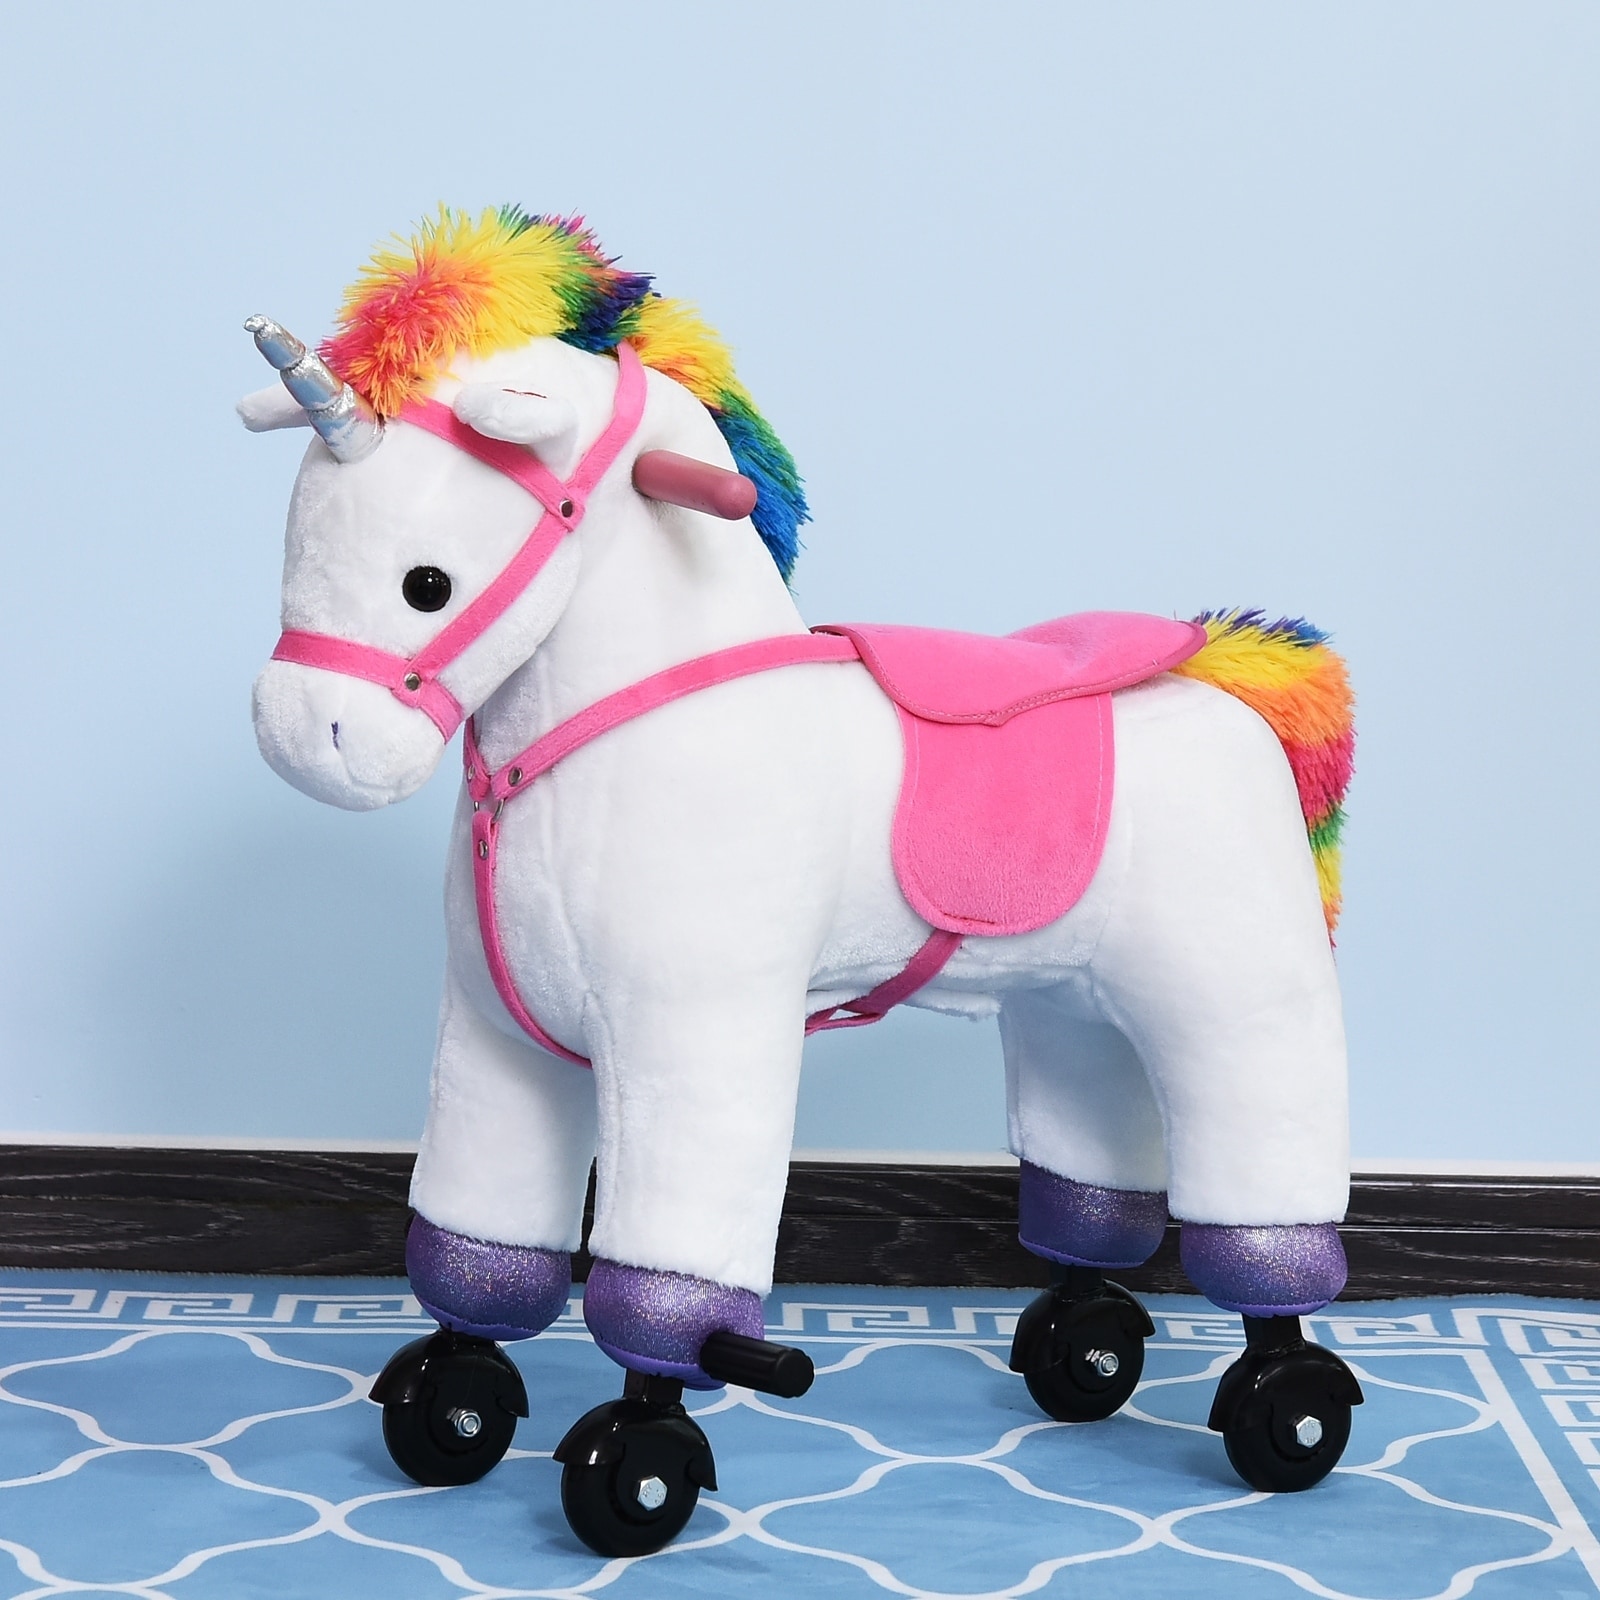 battery operated walking horse toy